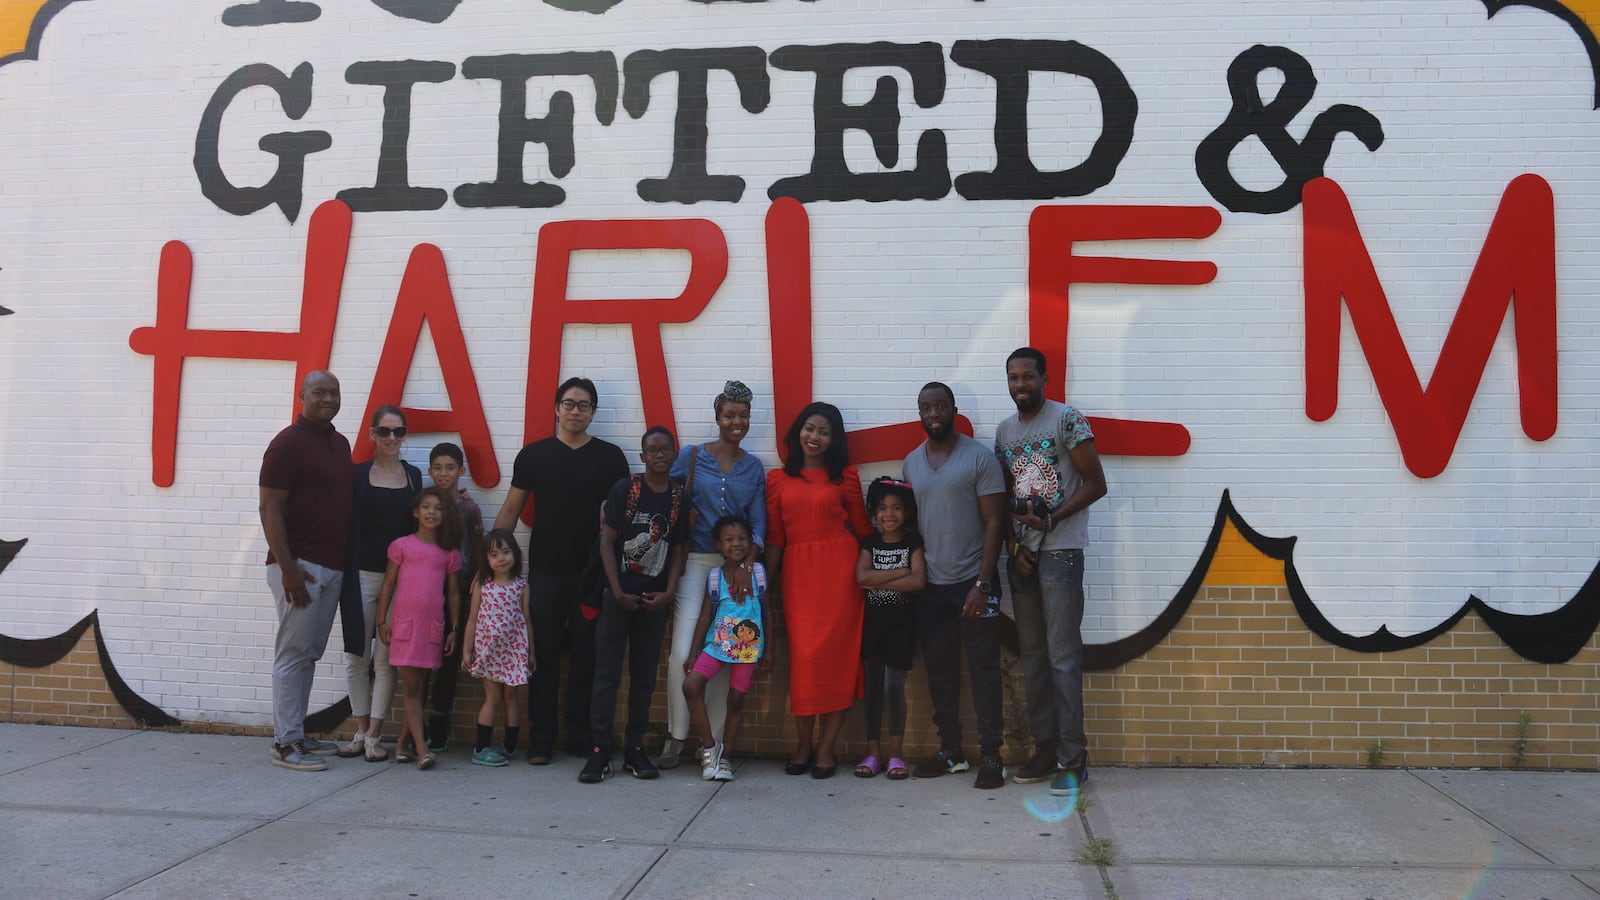 Genisha Metcalf, center right, and Dennis Morgan, far left, are among the parents at P.S. 180 who are leading a grassroots effort to boost Harlem schools.